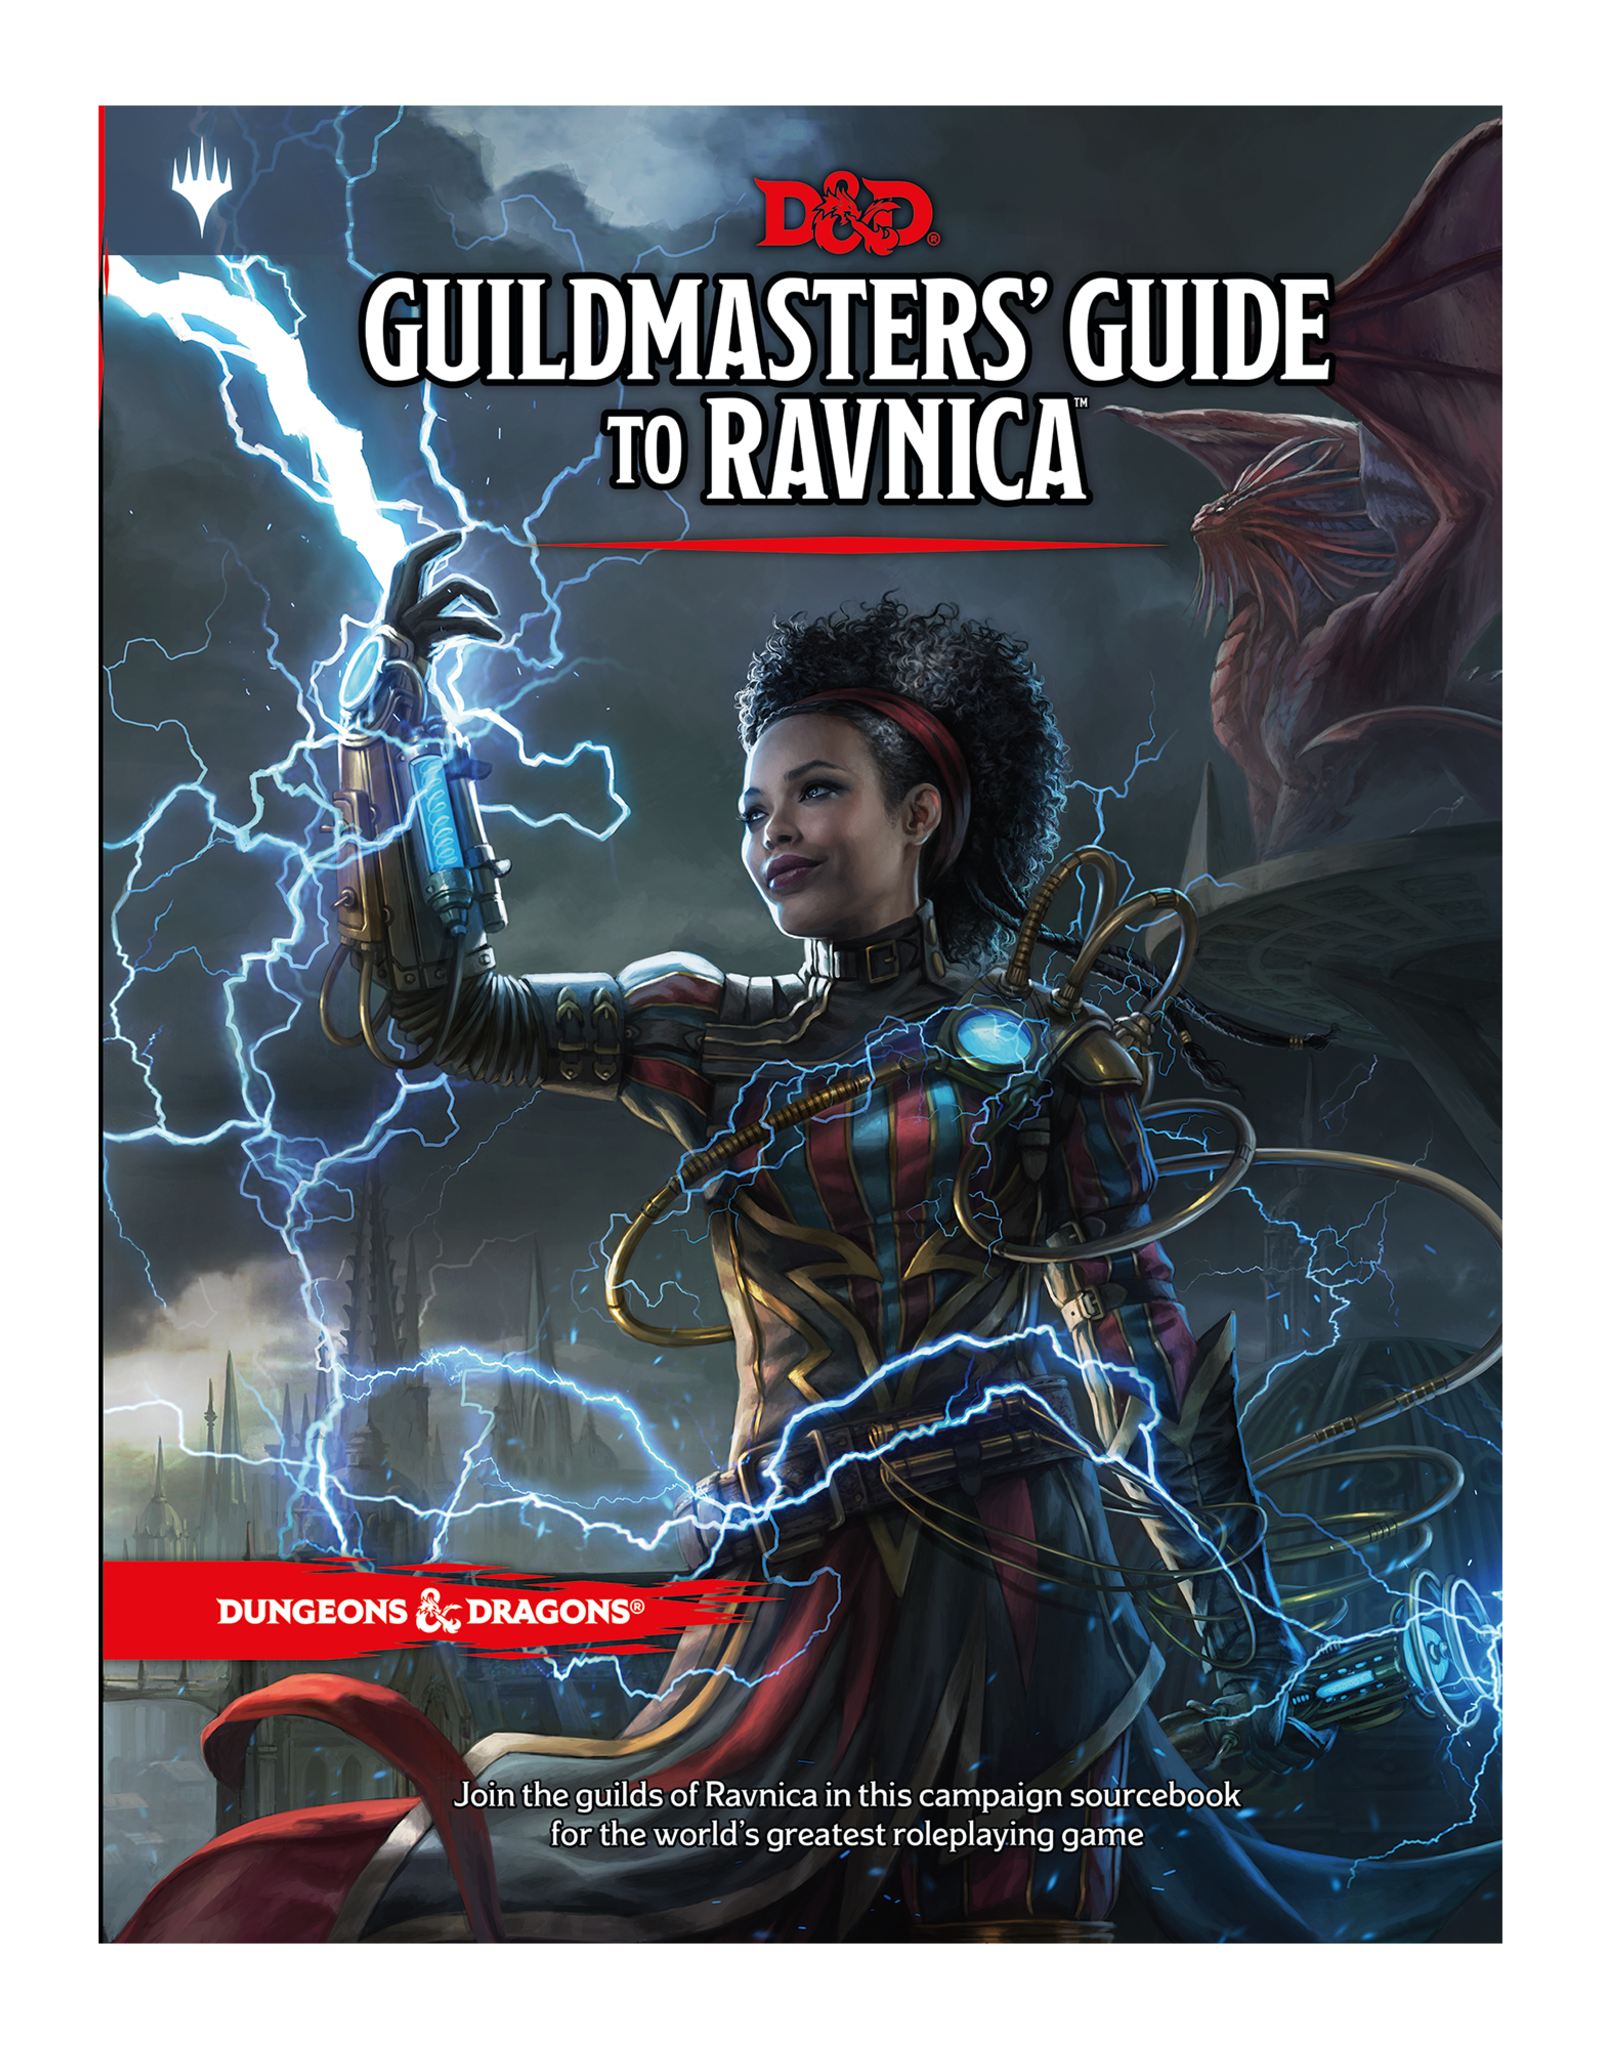 Dungeons & Dragons D&D 5e: Guildmaster's Guide to Ravnica